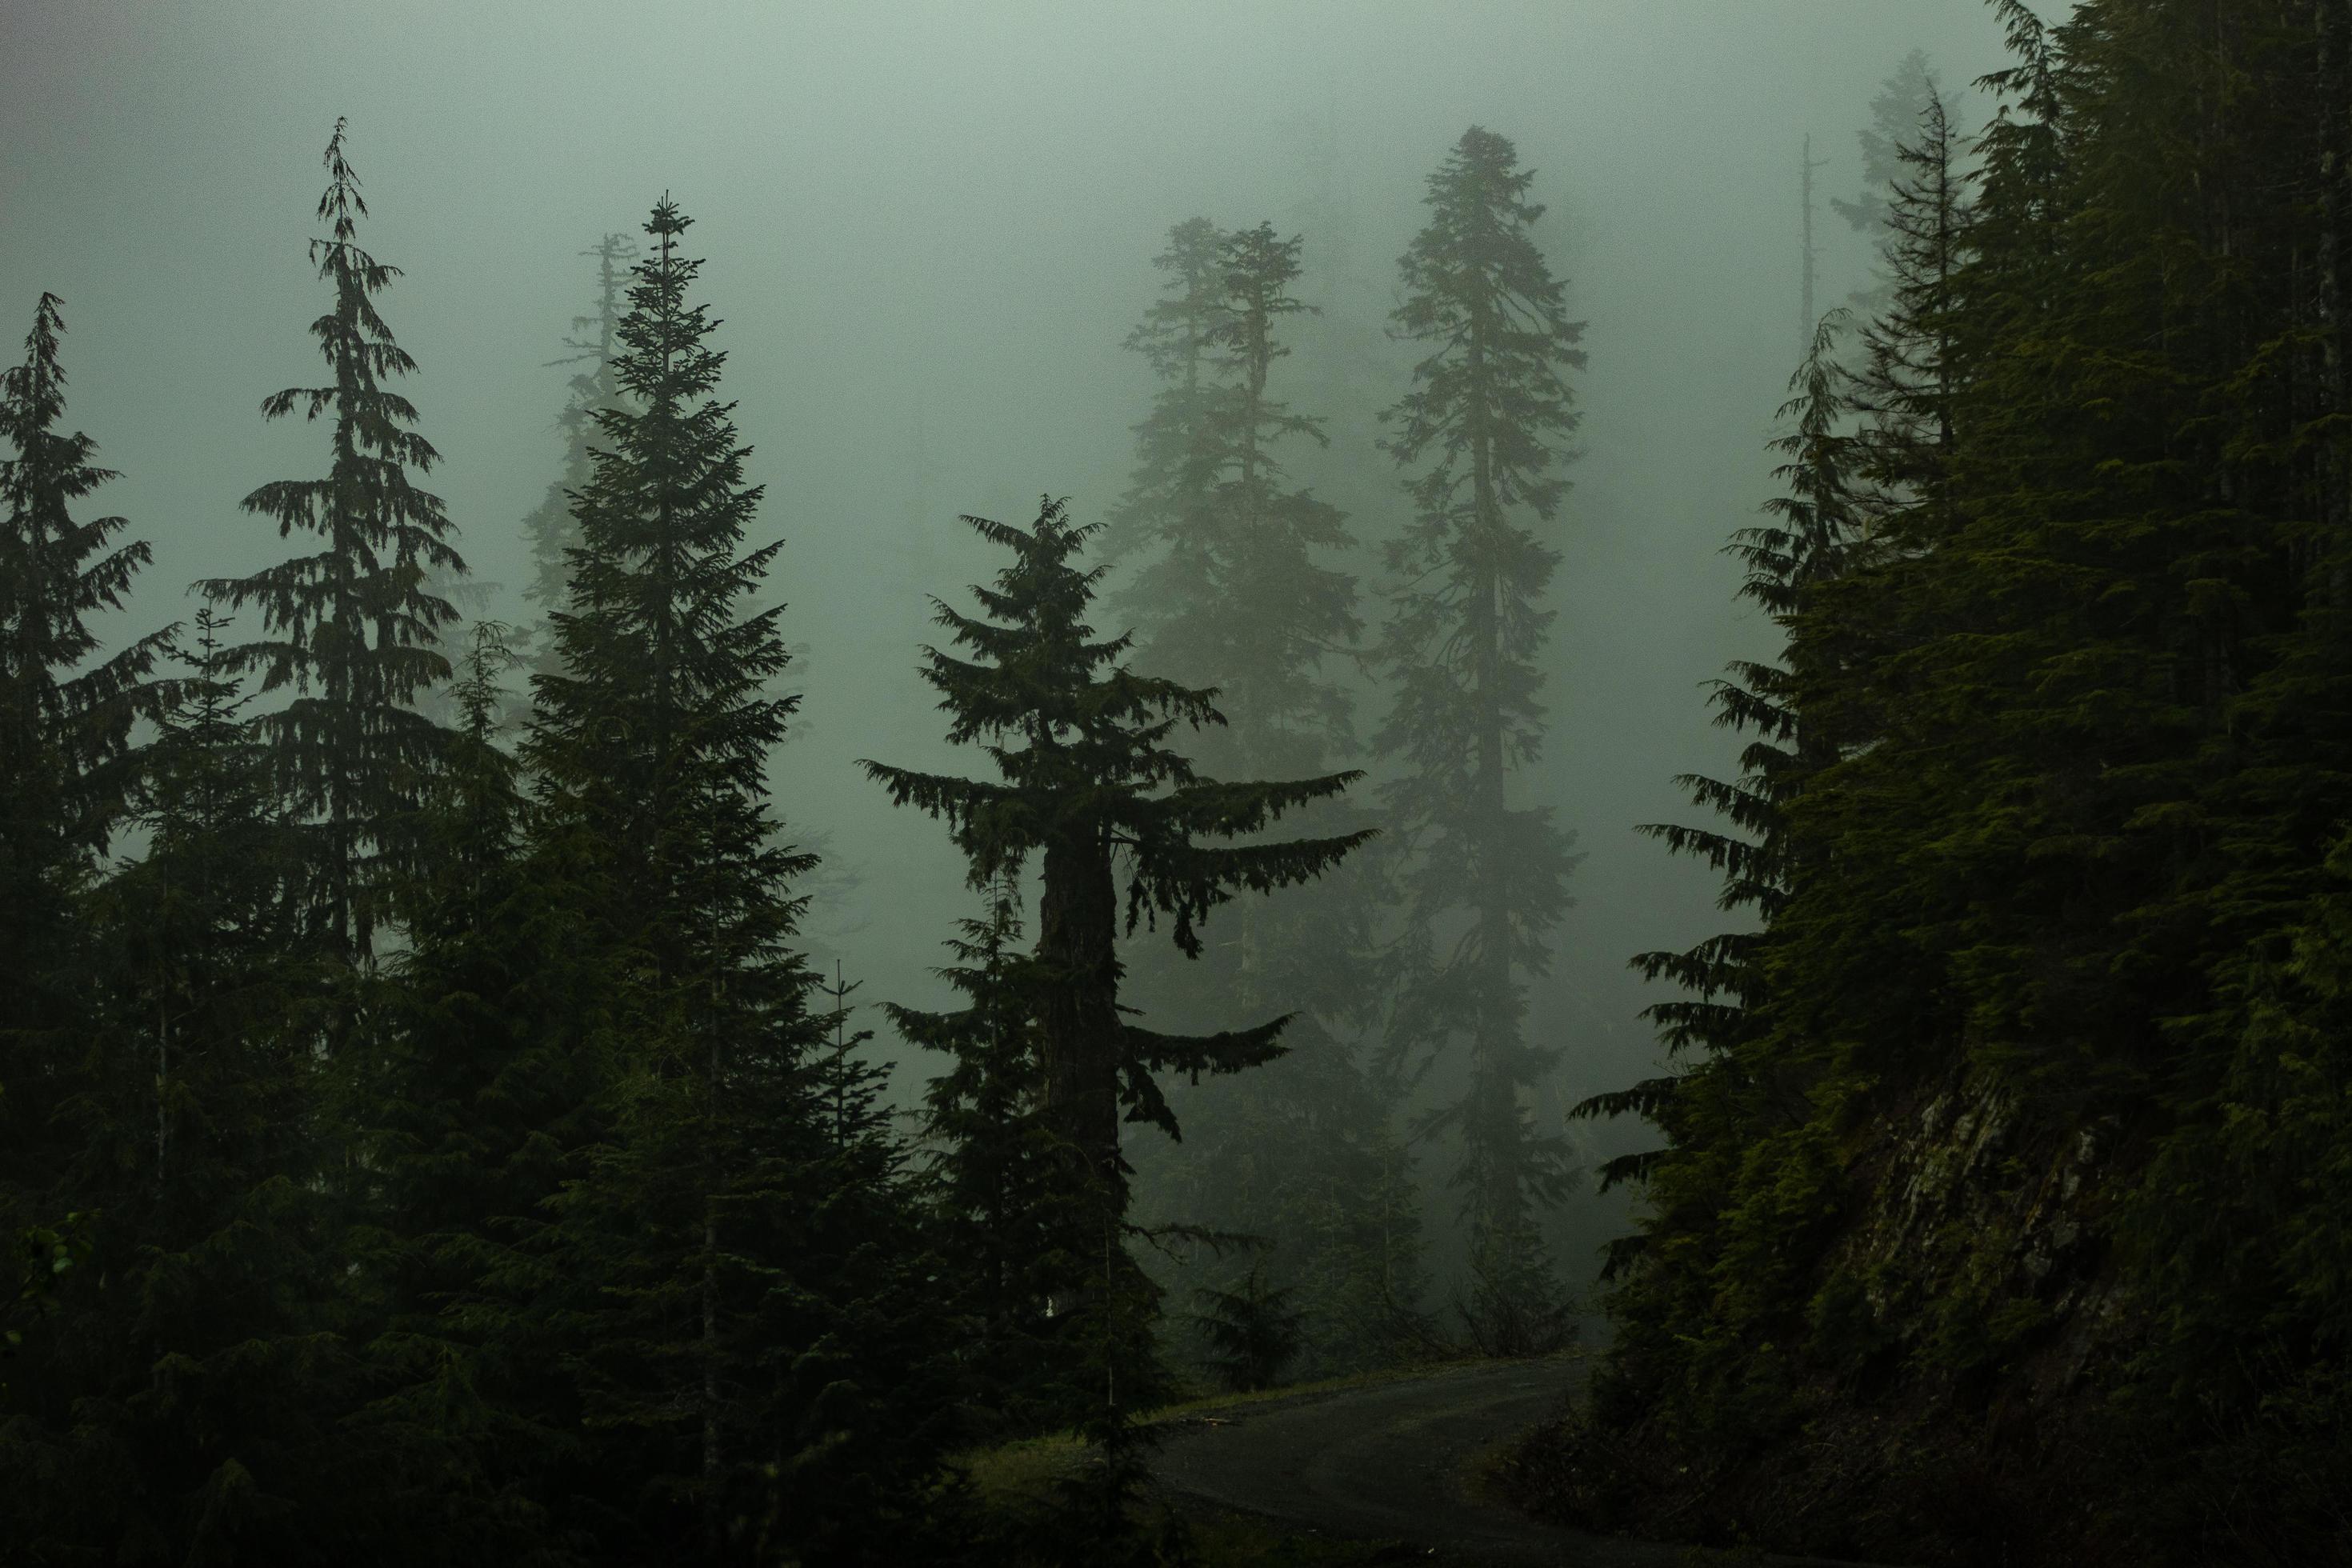 A dark and foggy forest with trees and a road - Foggy forest